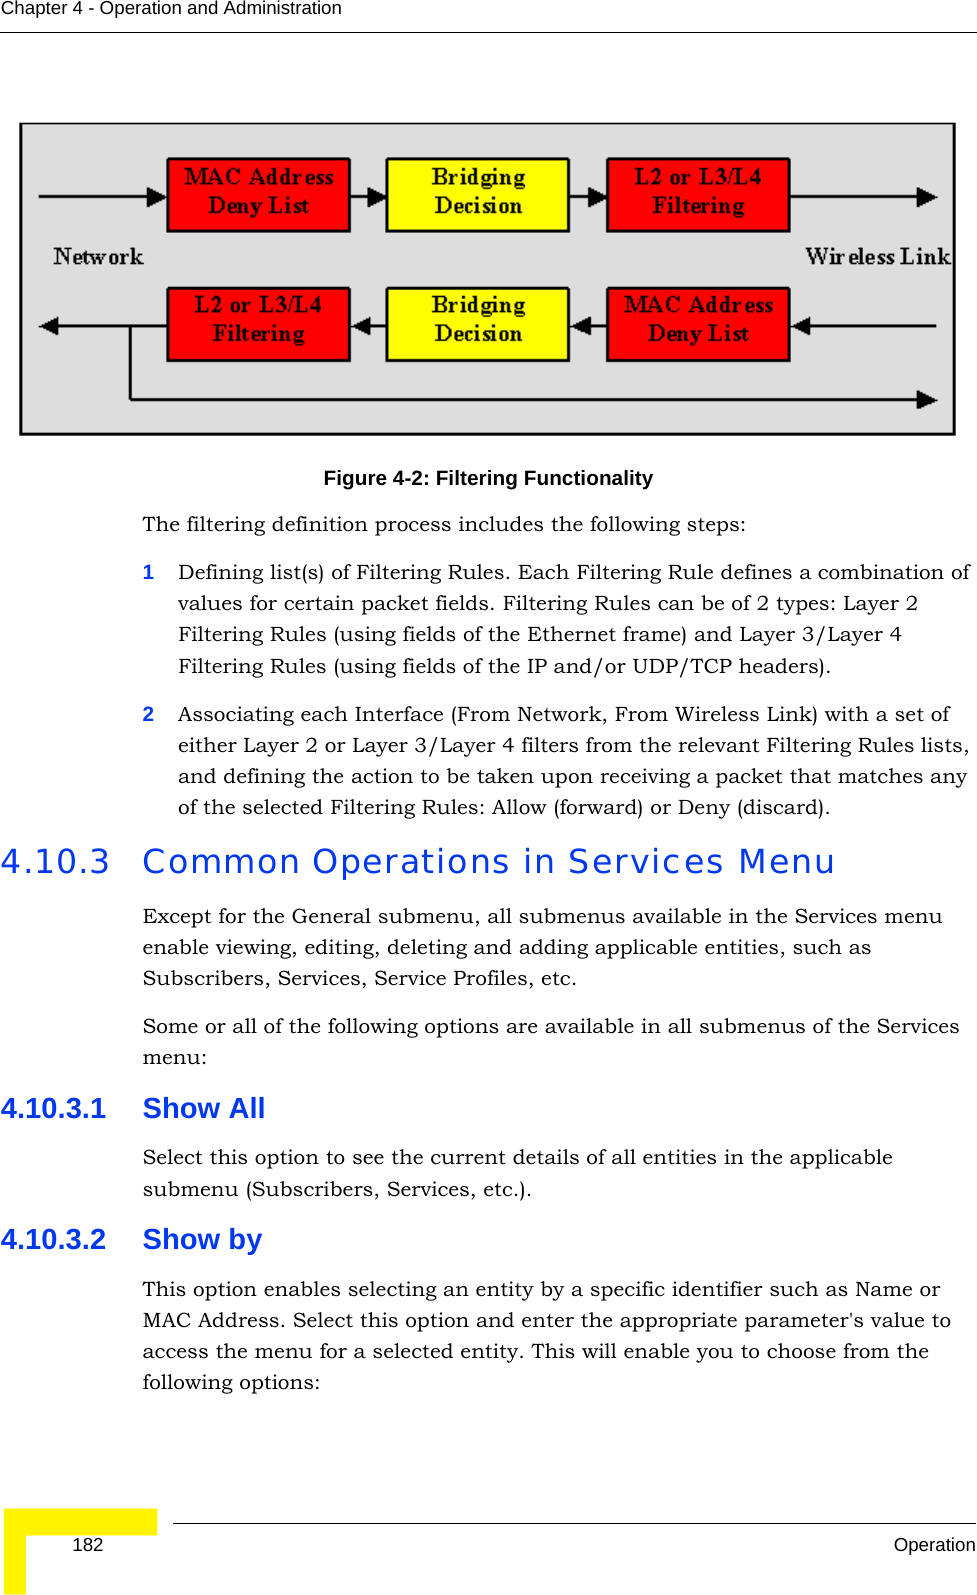  182 OperationChapter 4 - Operation and Administration The filtering definition process includes the following steps:1Defining list(s) of Filtering Rules. Each Filtering Rule defines a combination of values for certain packet fields. Filtering Rules can be of 2 types: Layer 2 Filtering Rules (using fields of the Ethernet frame) and Layer 3/Layer 4 Filtering Rules (using fields of the IP and/or UDP/TCP headers). 2Associating each Interface (From Network, From Wireless Link) with a set of either Layer 2 or Layer 3/Layer 4 filters from the relevant Filtering Rules lists, and defining the action to be taken upon receiving a packet that matches any of the selected Filtering Rules: Allow (forward) or Deny (discard).4.10.3 Common Operations in Services MenuExcept for the General submenu, all submenus available in the Services menu enable viewing, editing, deleting and adding applicable entities, such as Subscribers, Services, Service Profiles, etc.Some or all of the following options are available in all submenus of the Services menu:4.10.3.1 Show AllSelect this option to see the current details of all entities in the applicable submenu (Subscribers, Services, etc.).4.10.3.2 Show byThis option enables selecting an entity by a specific identifier such as Name or MAC Address. Select this option and enter the appropriate parameter&apos;s value to access the menu for a selected entity. This will enable you to choose from the following options:Figure 4-2: Filtering Functionality